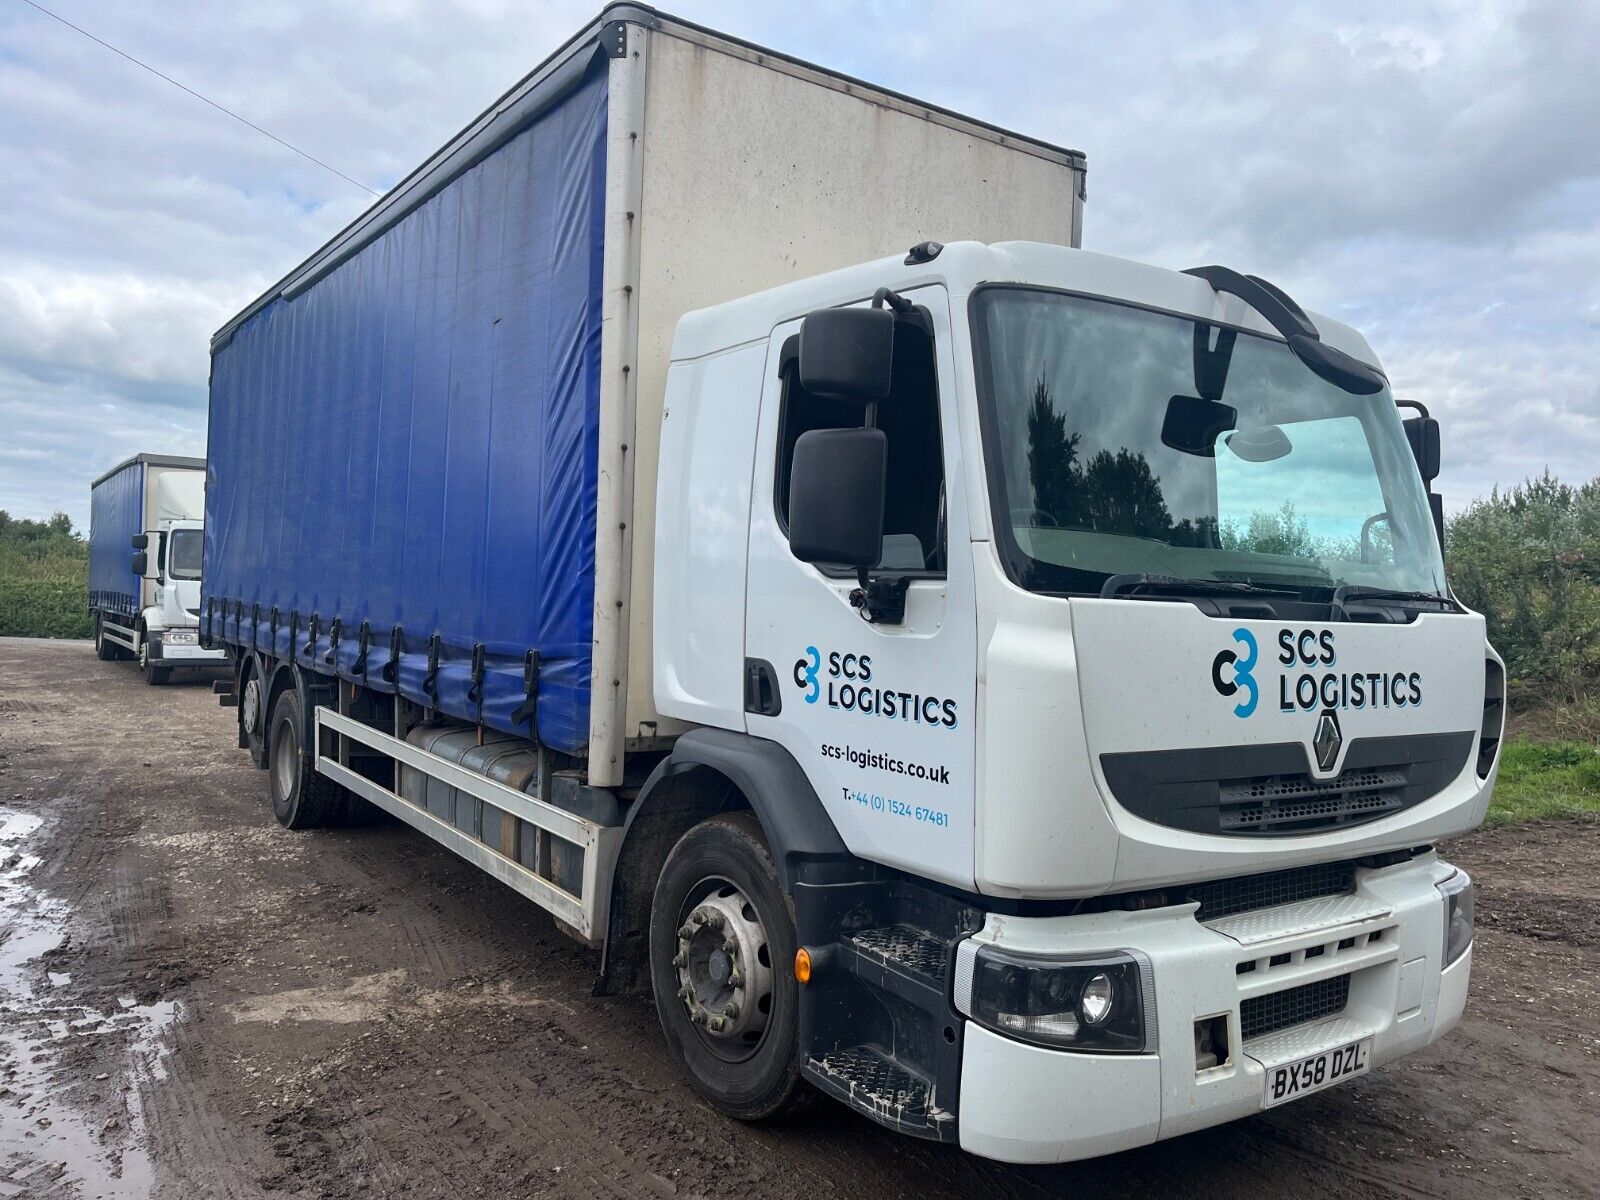 Bid on 2008 RENAULT PREMIUM 240 RIGID CURTAINSIDER TRUCK- Buy &amp; Sell on Auction with EAMA Group